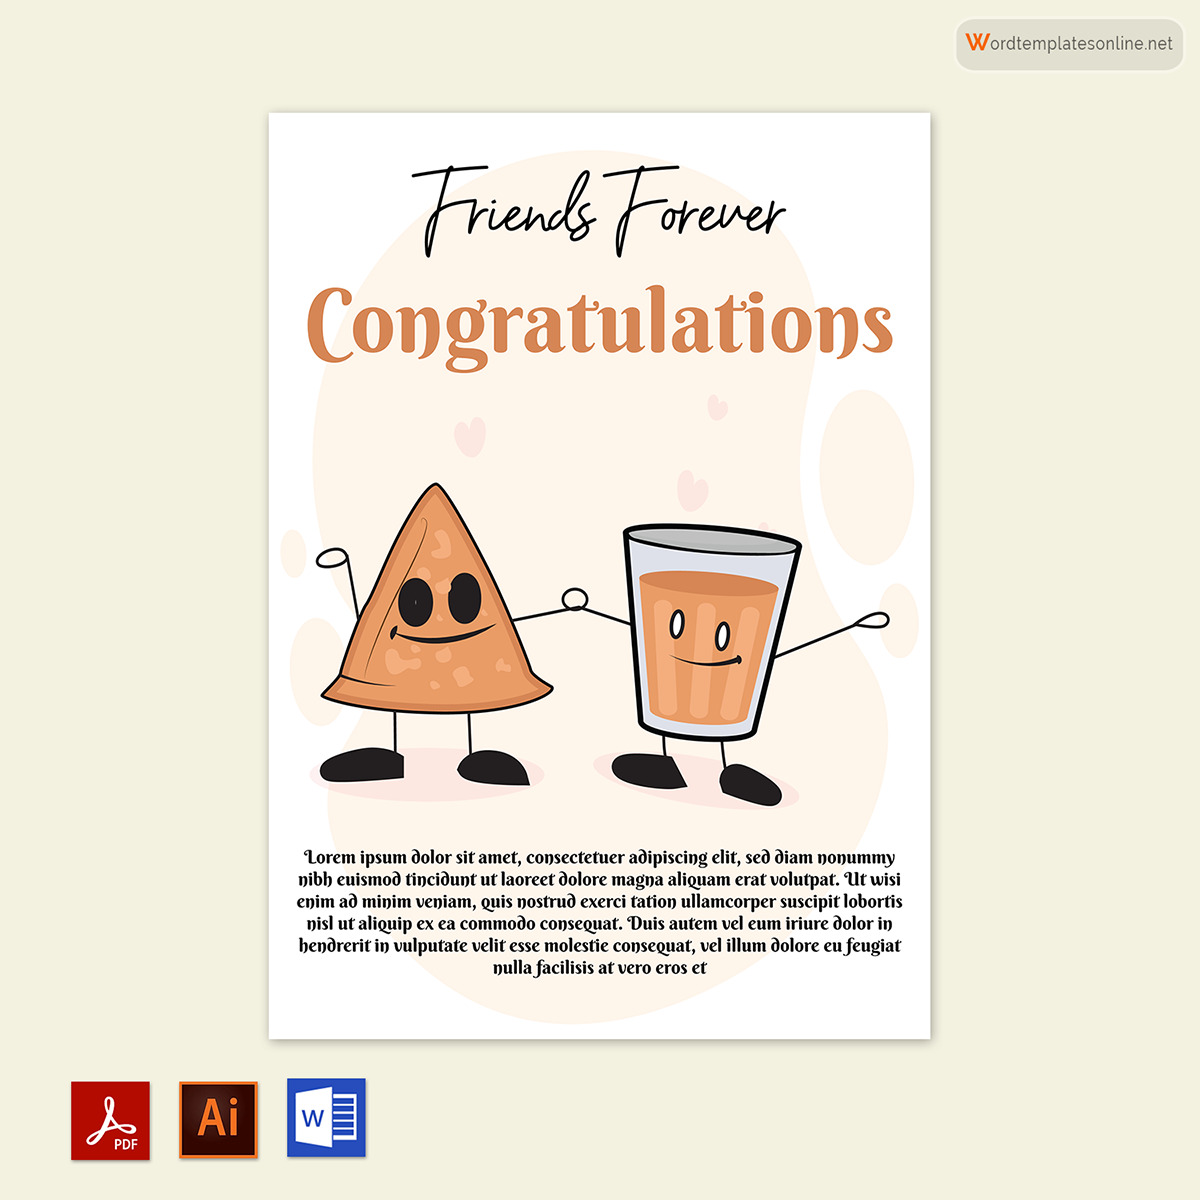 "Professional congratulations greeting card example"